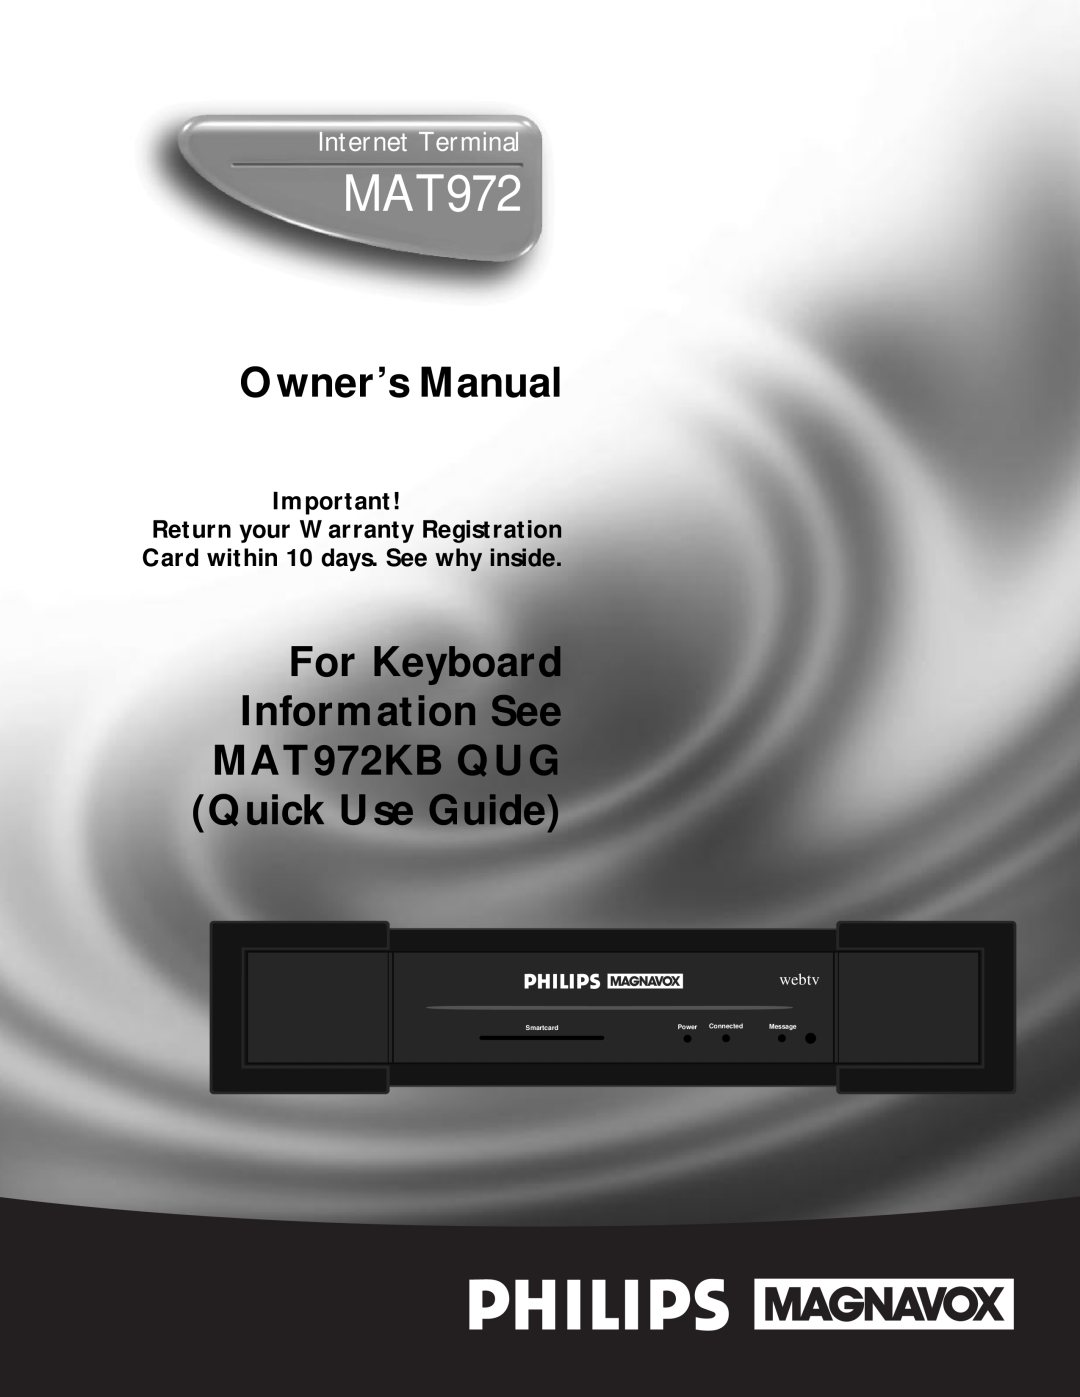 Philips owner manual Owner’s Manual, For Keyboard Information See MAT972KB QUG Quick Use Guide, Internet Terminal 